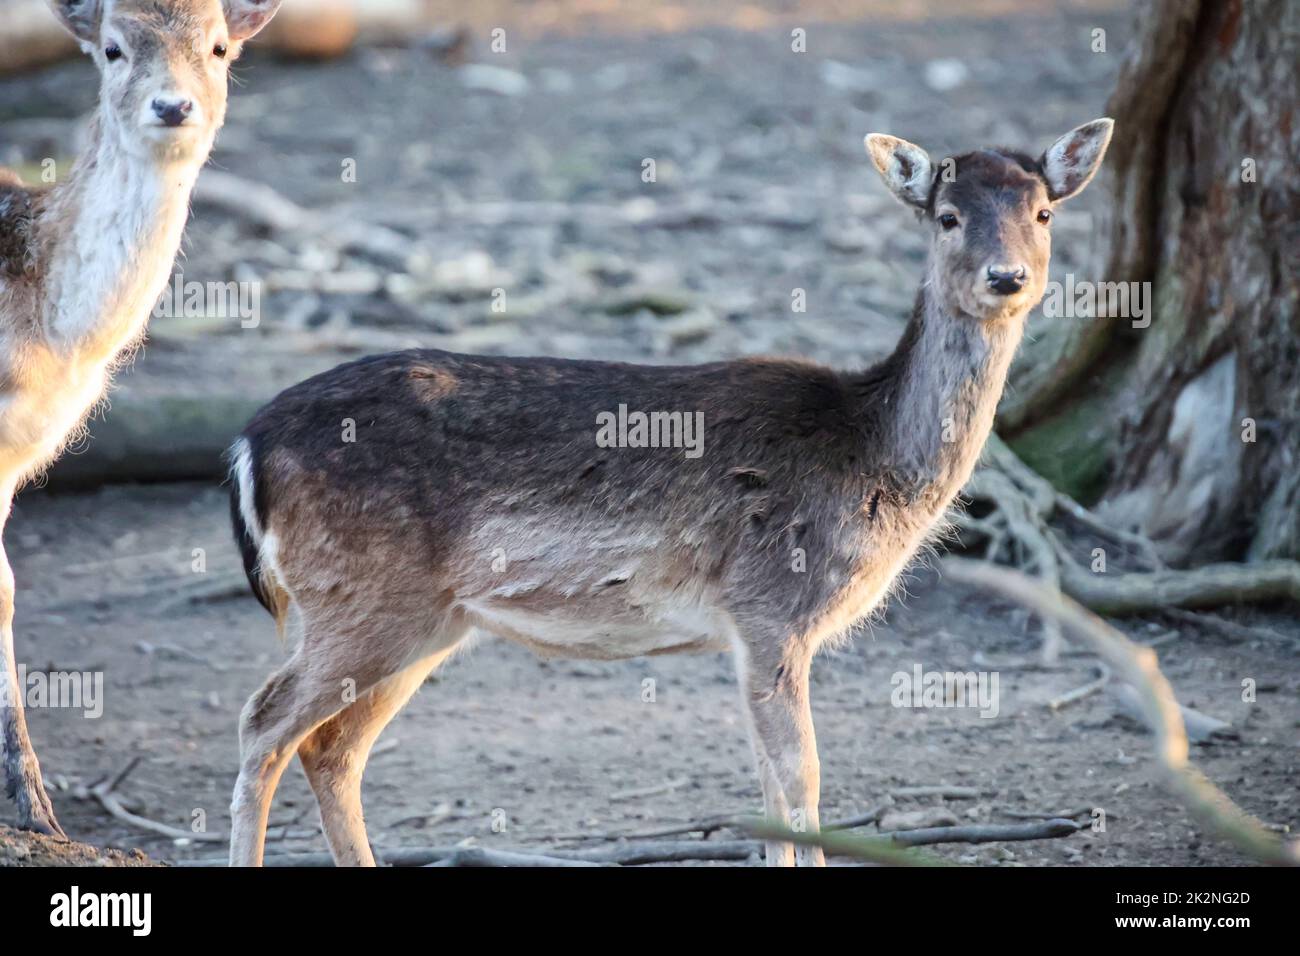 Deer, stags, cloven-hoofed animals in an enclosure. Stock Photo